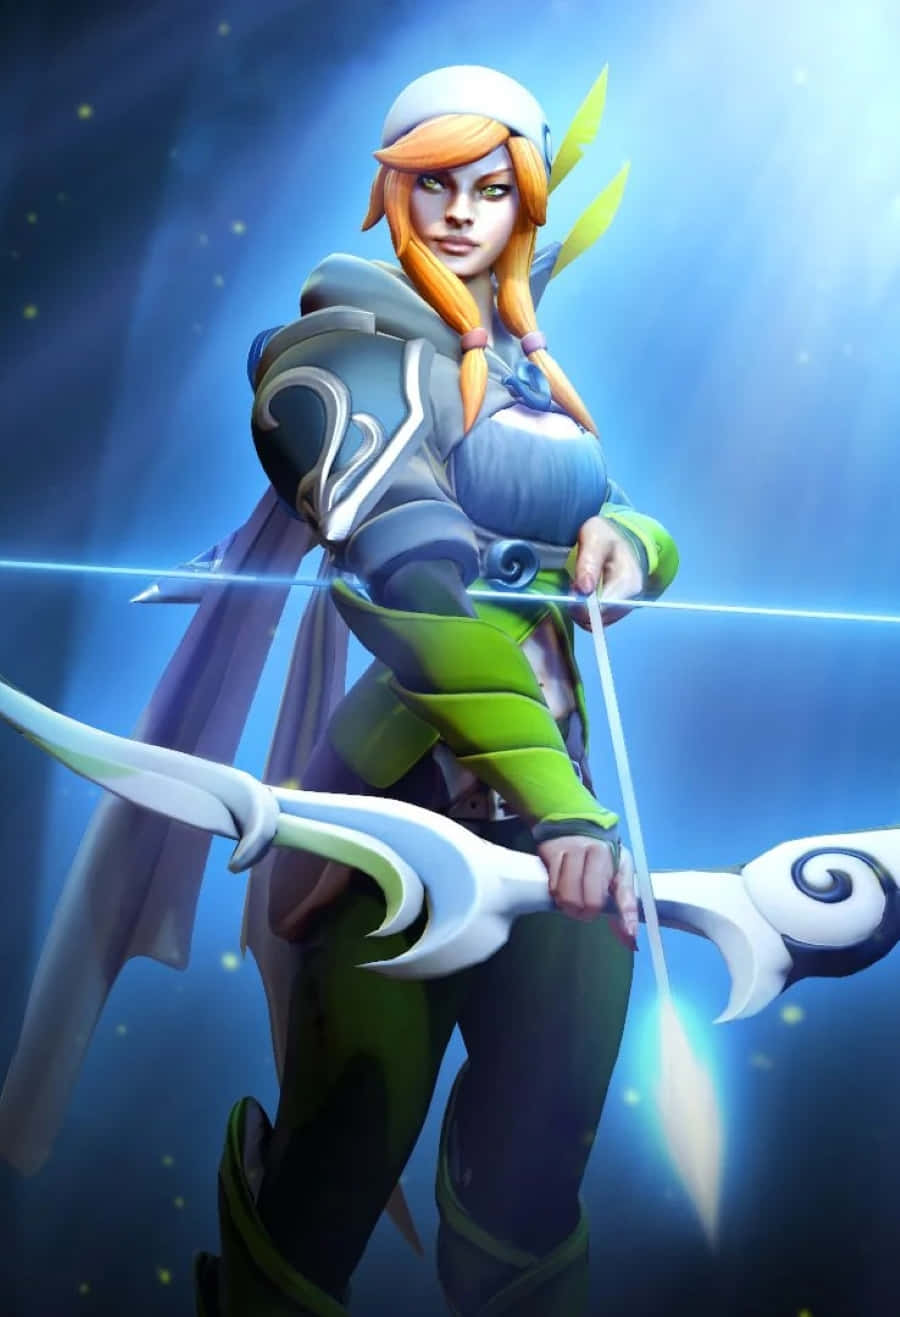 Windranger, The Skilled Archer of The Dota 2 Universe Wallpaper